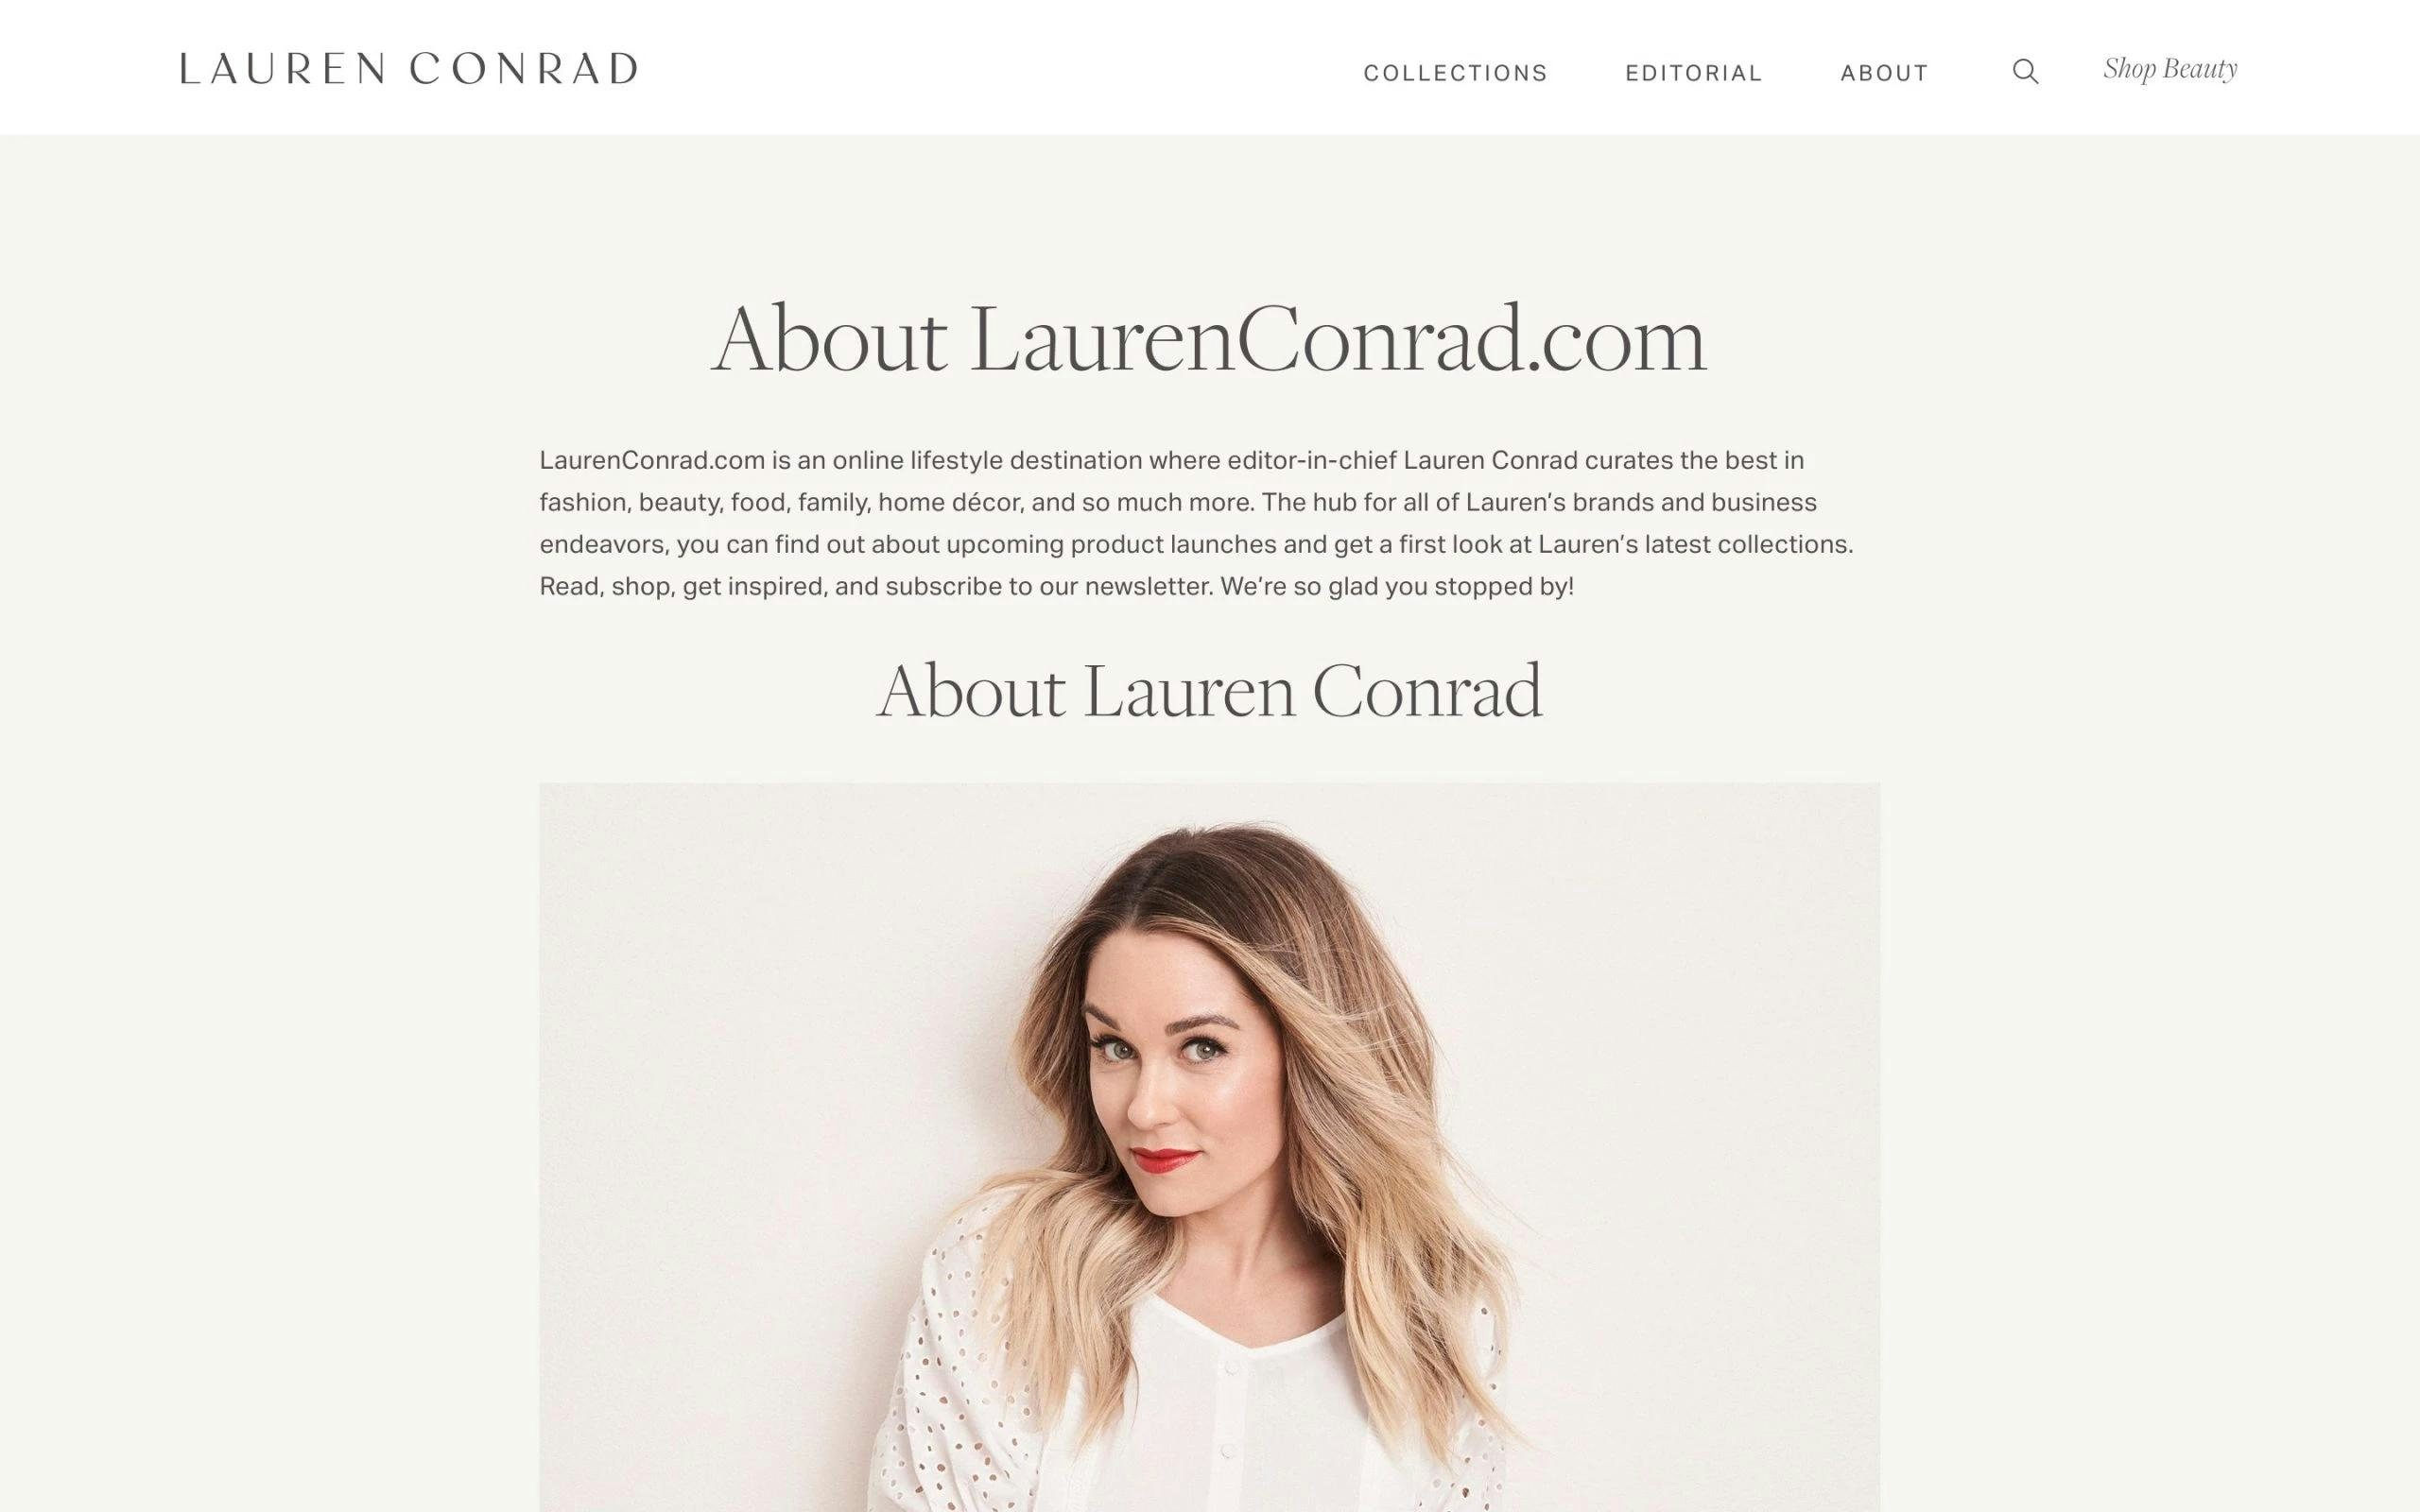 Lauran Conrad about me page